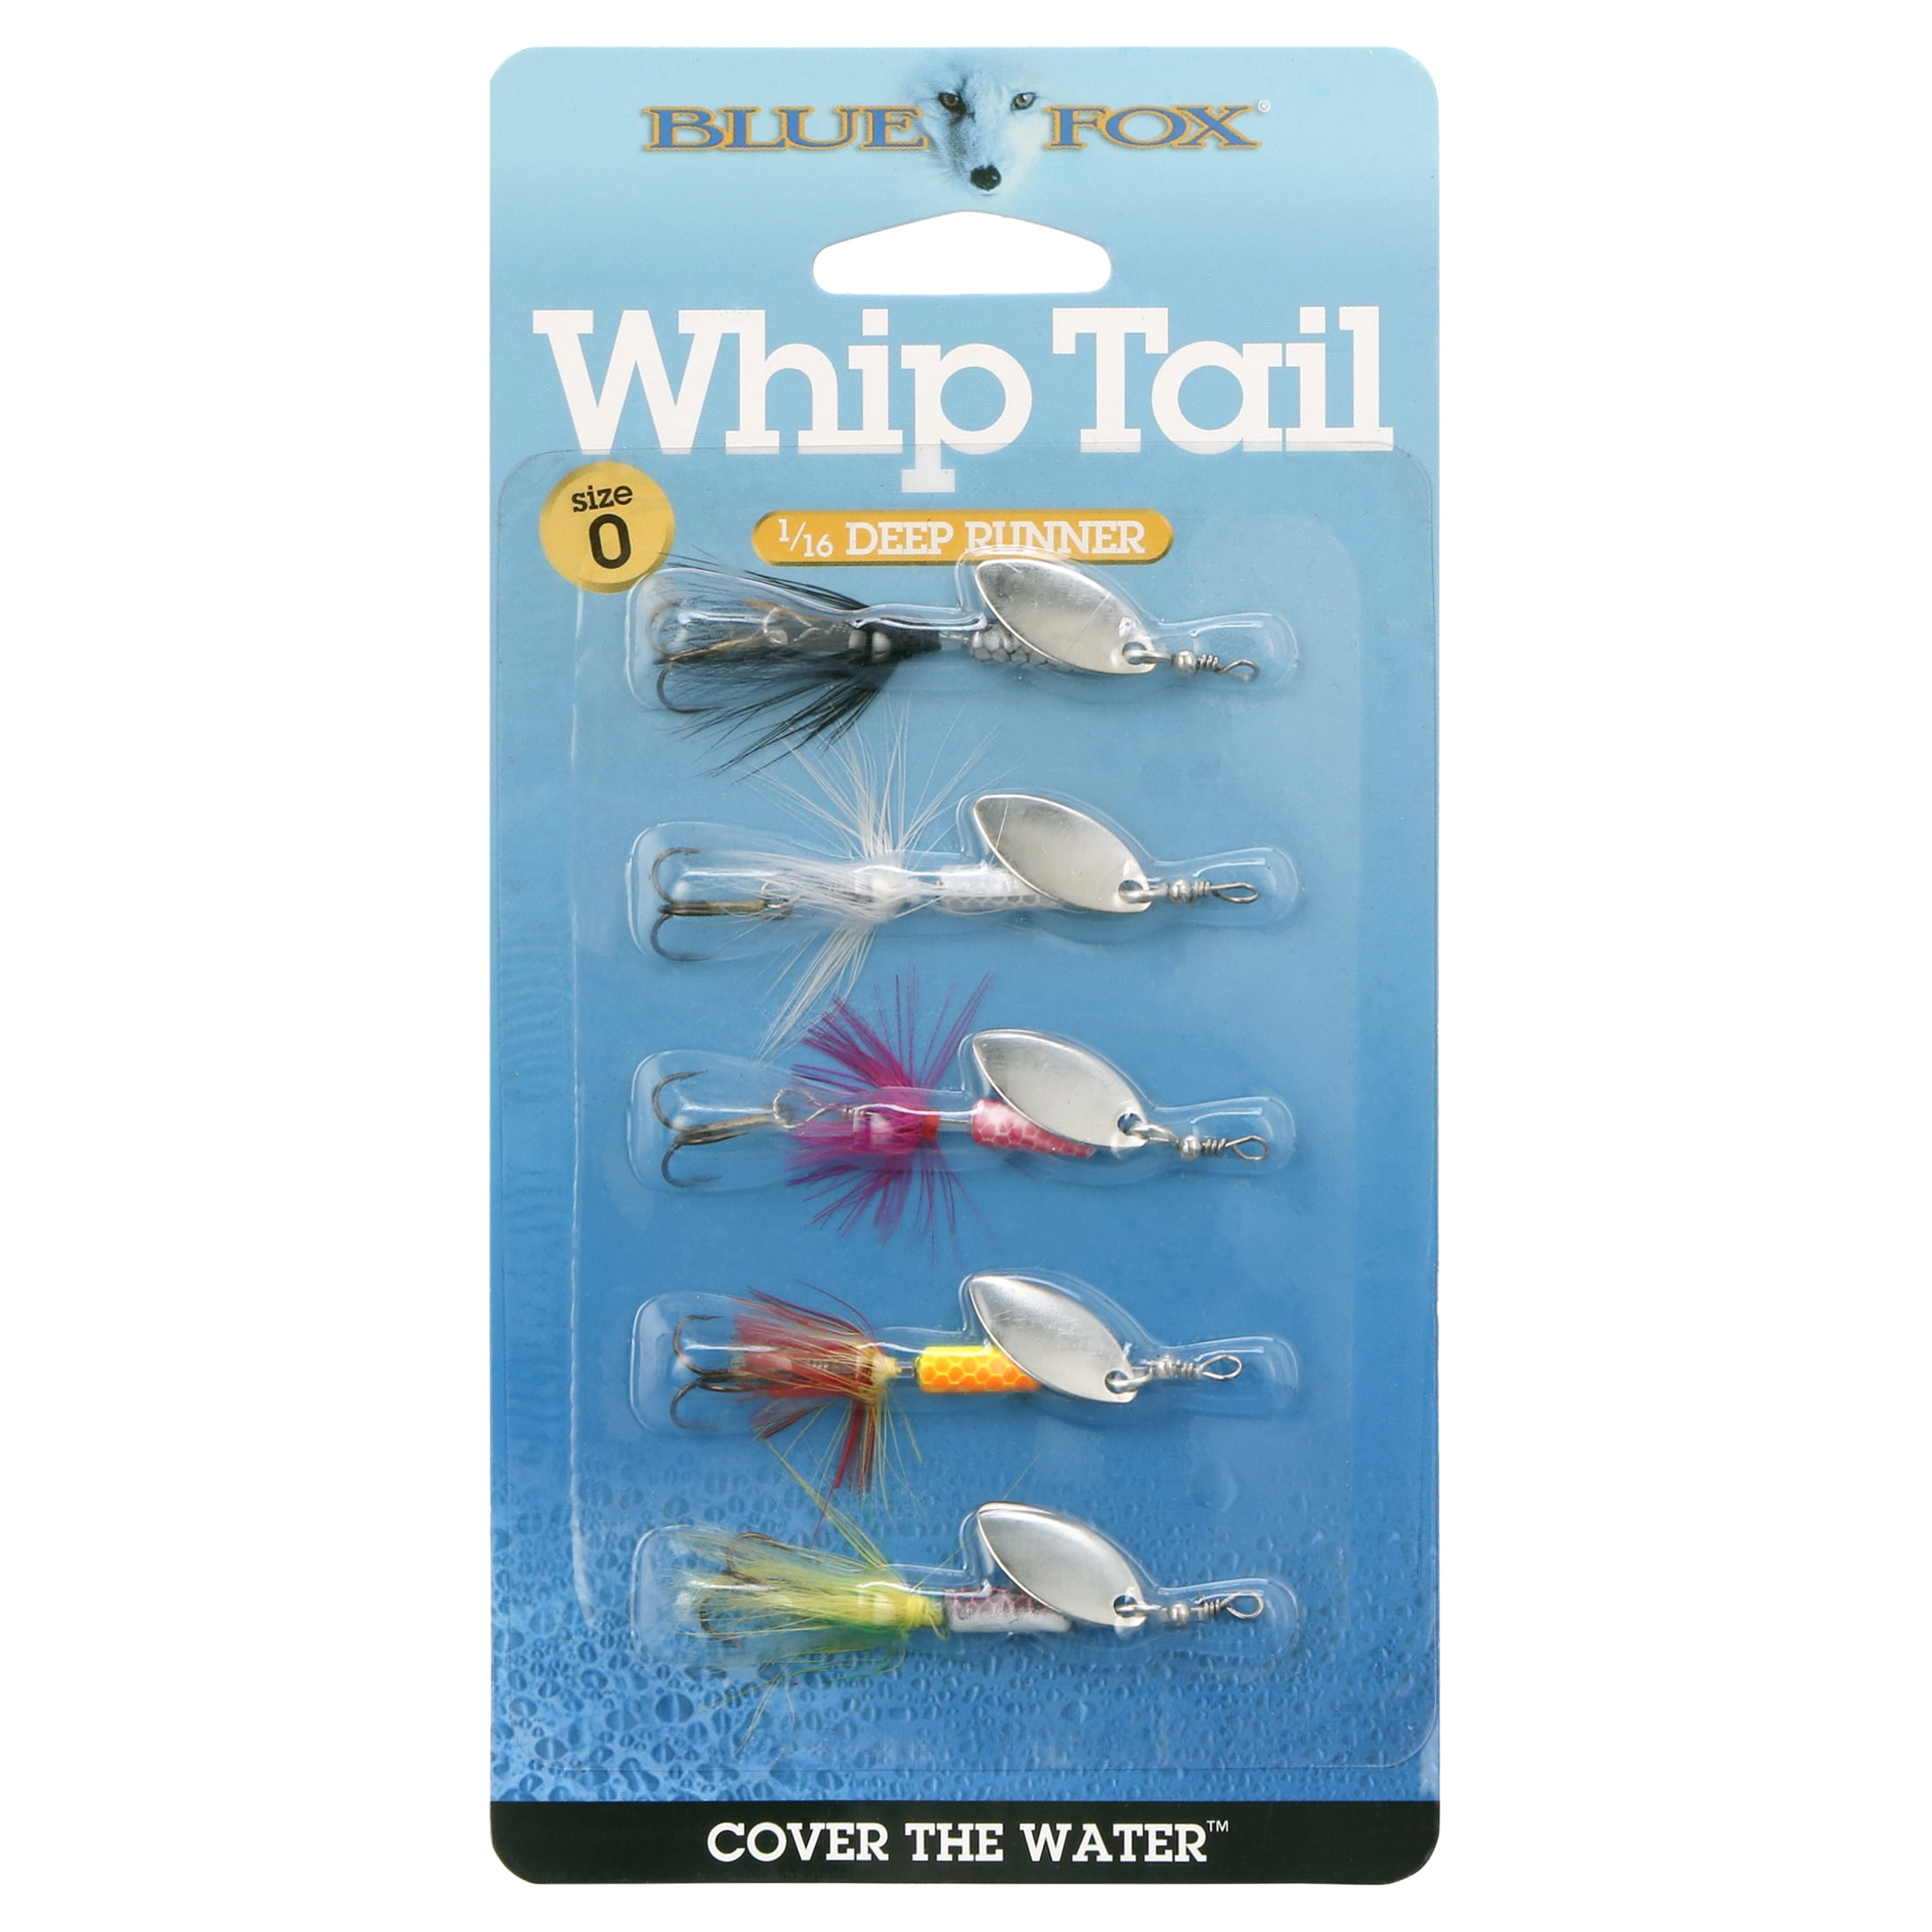 Blue Fox Whiptail Spinner Kit Size 0 Assorted Colors 1/16oz